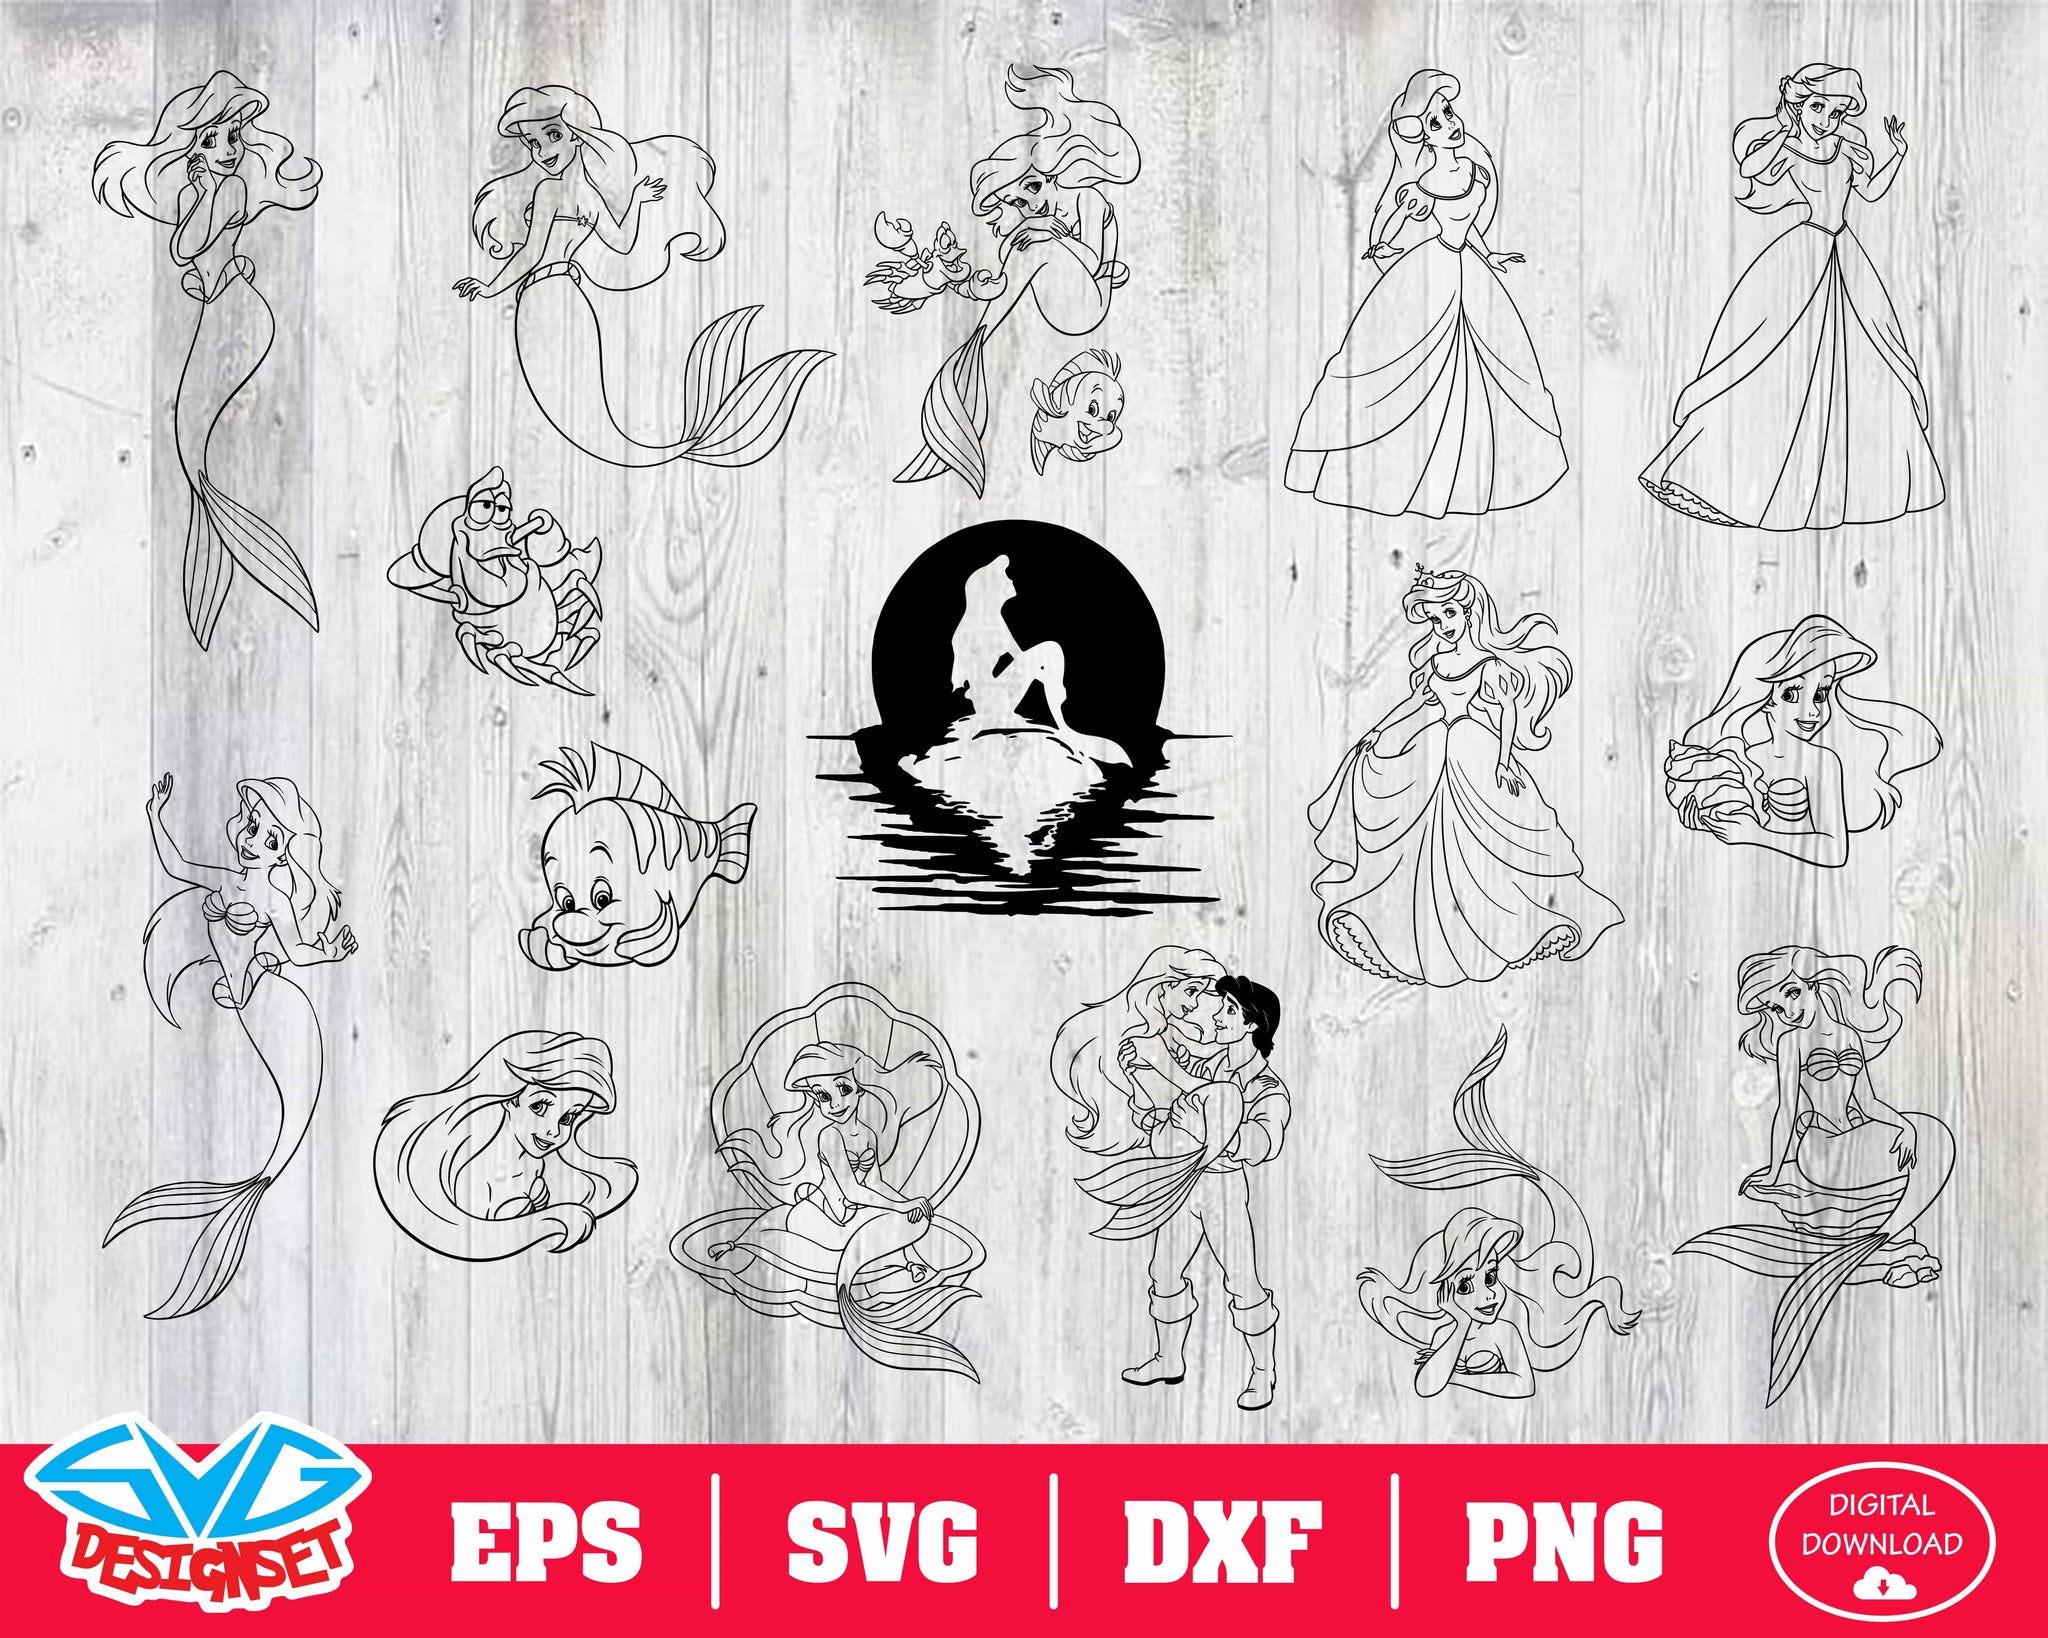 The Little Mermaid Svg, Dxf, Eps, Png, Clipart, Silhouette and Cutfiles #2 - SVGDesignSets